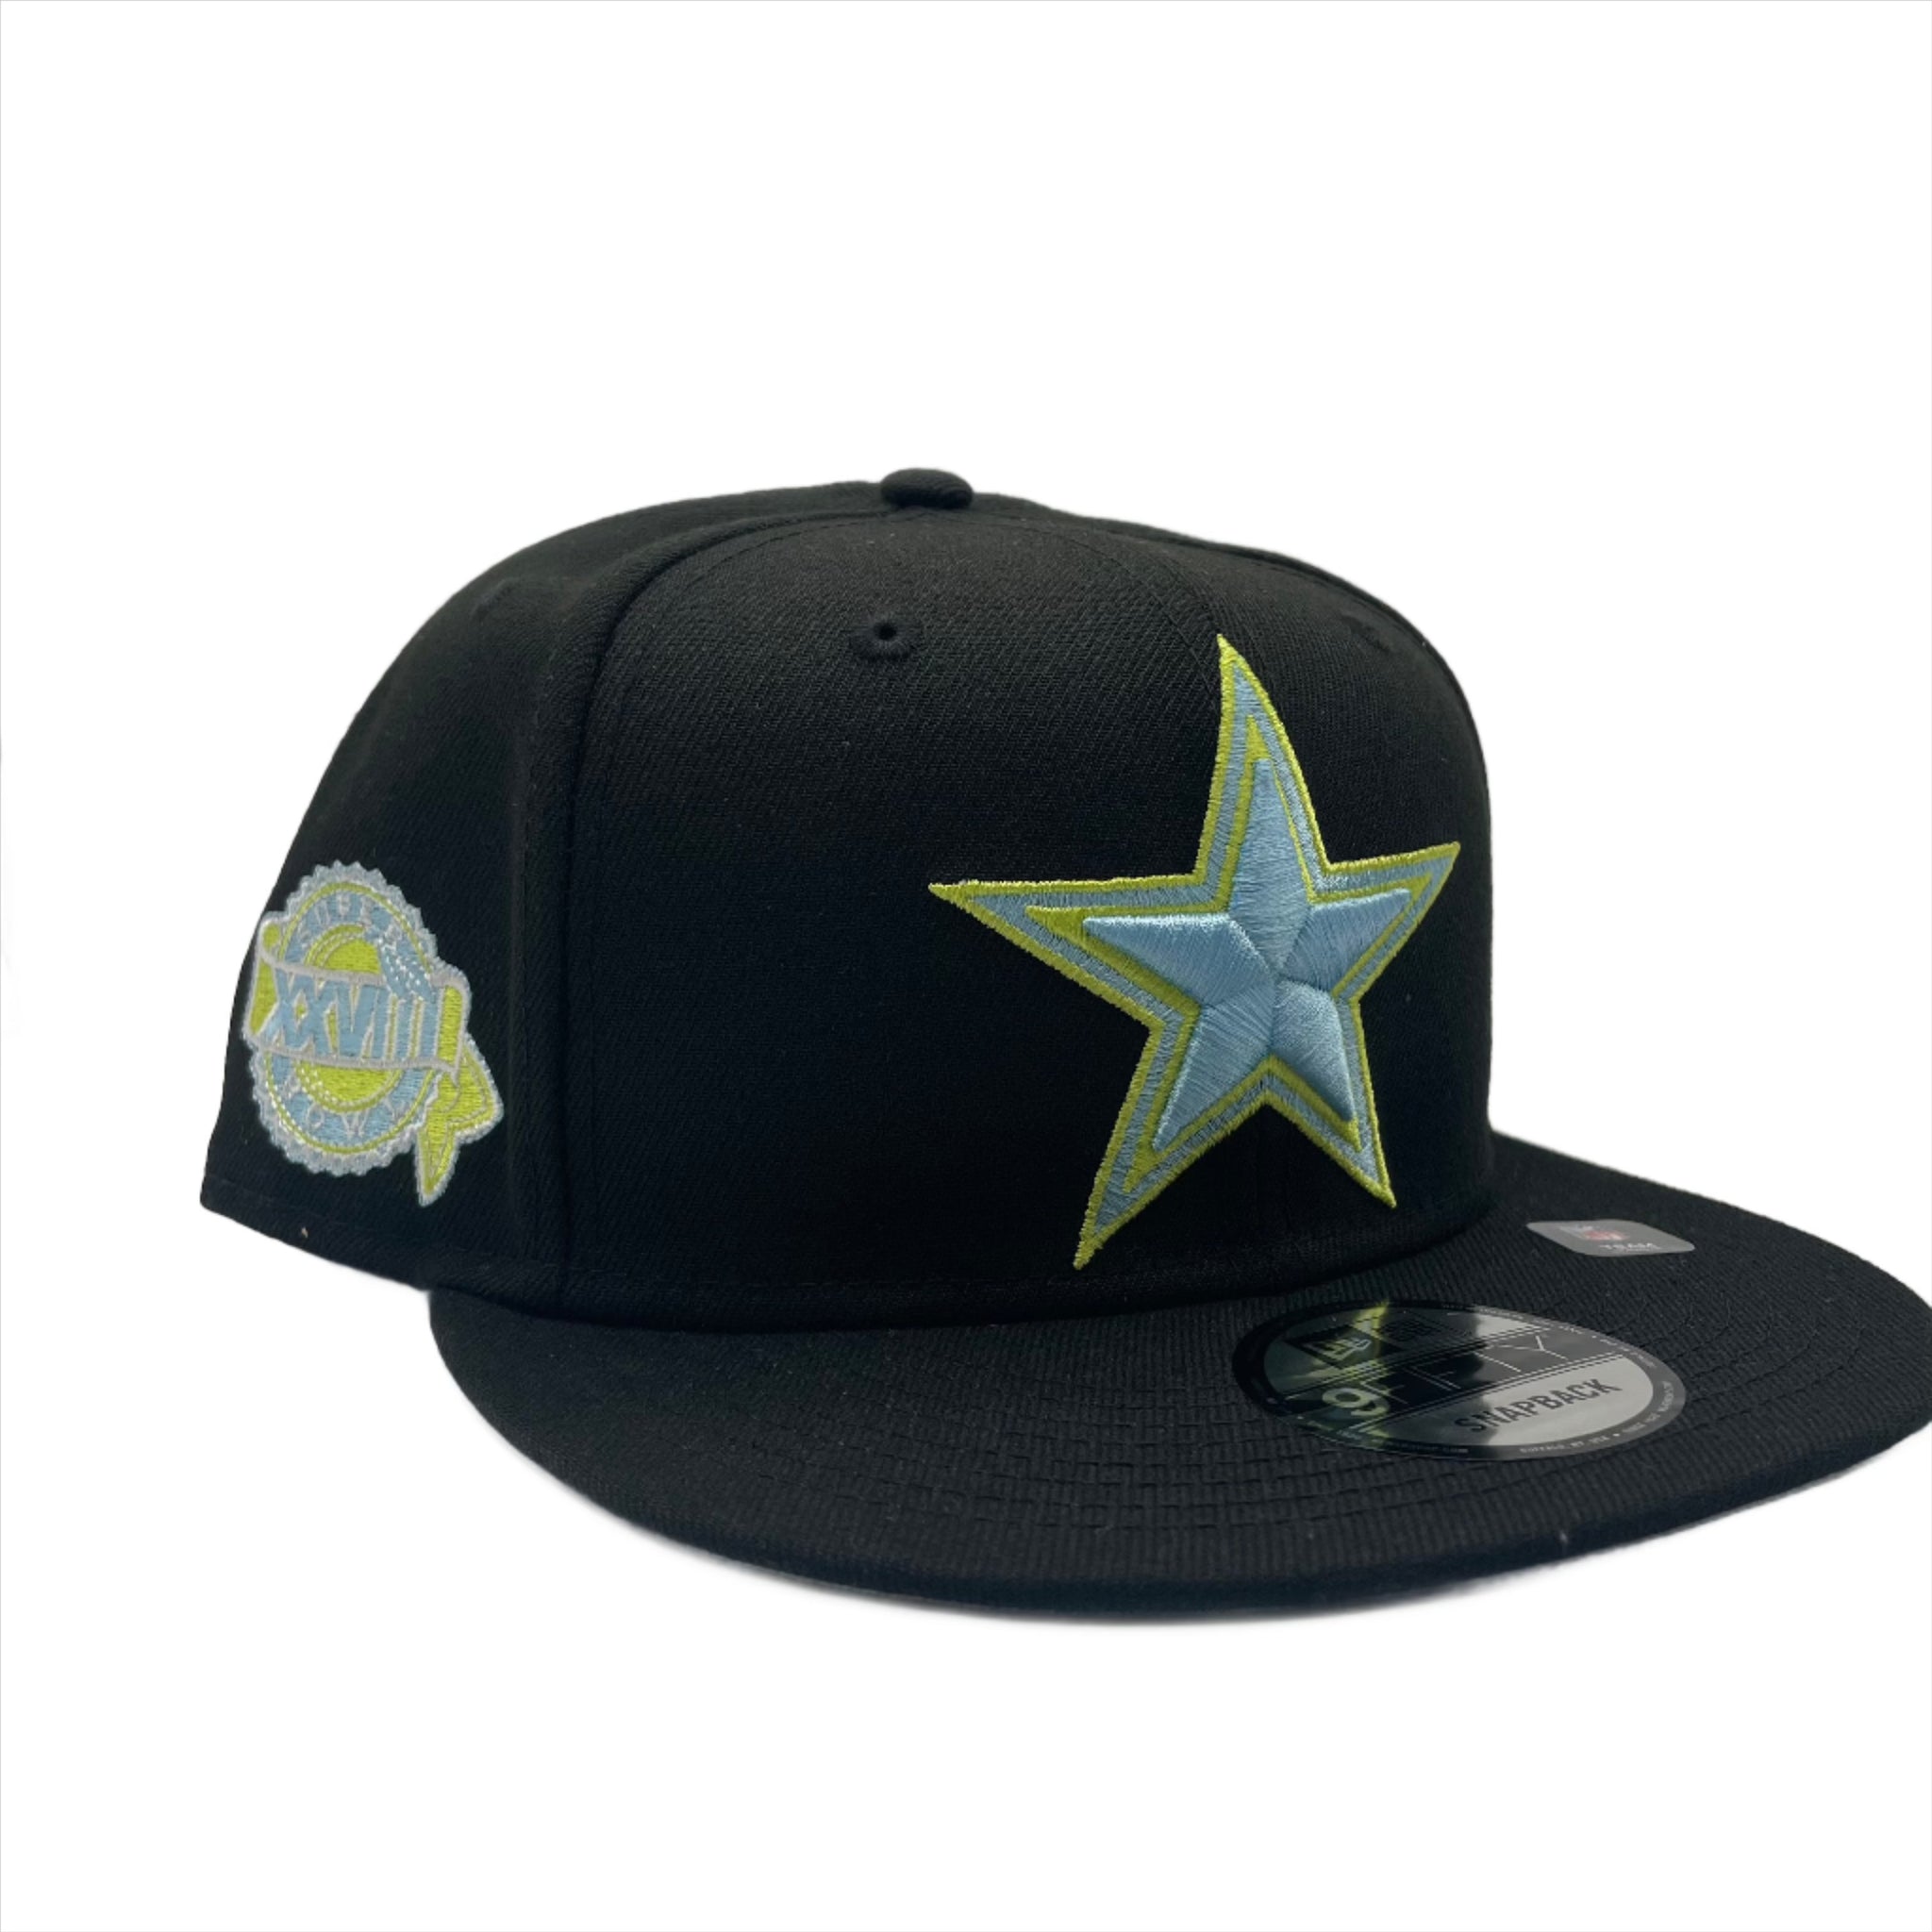 Dallas Cowboys Color Pack 9FIFTY Snapback Hat - Black And Neon